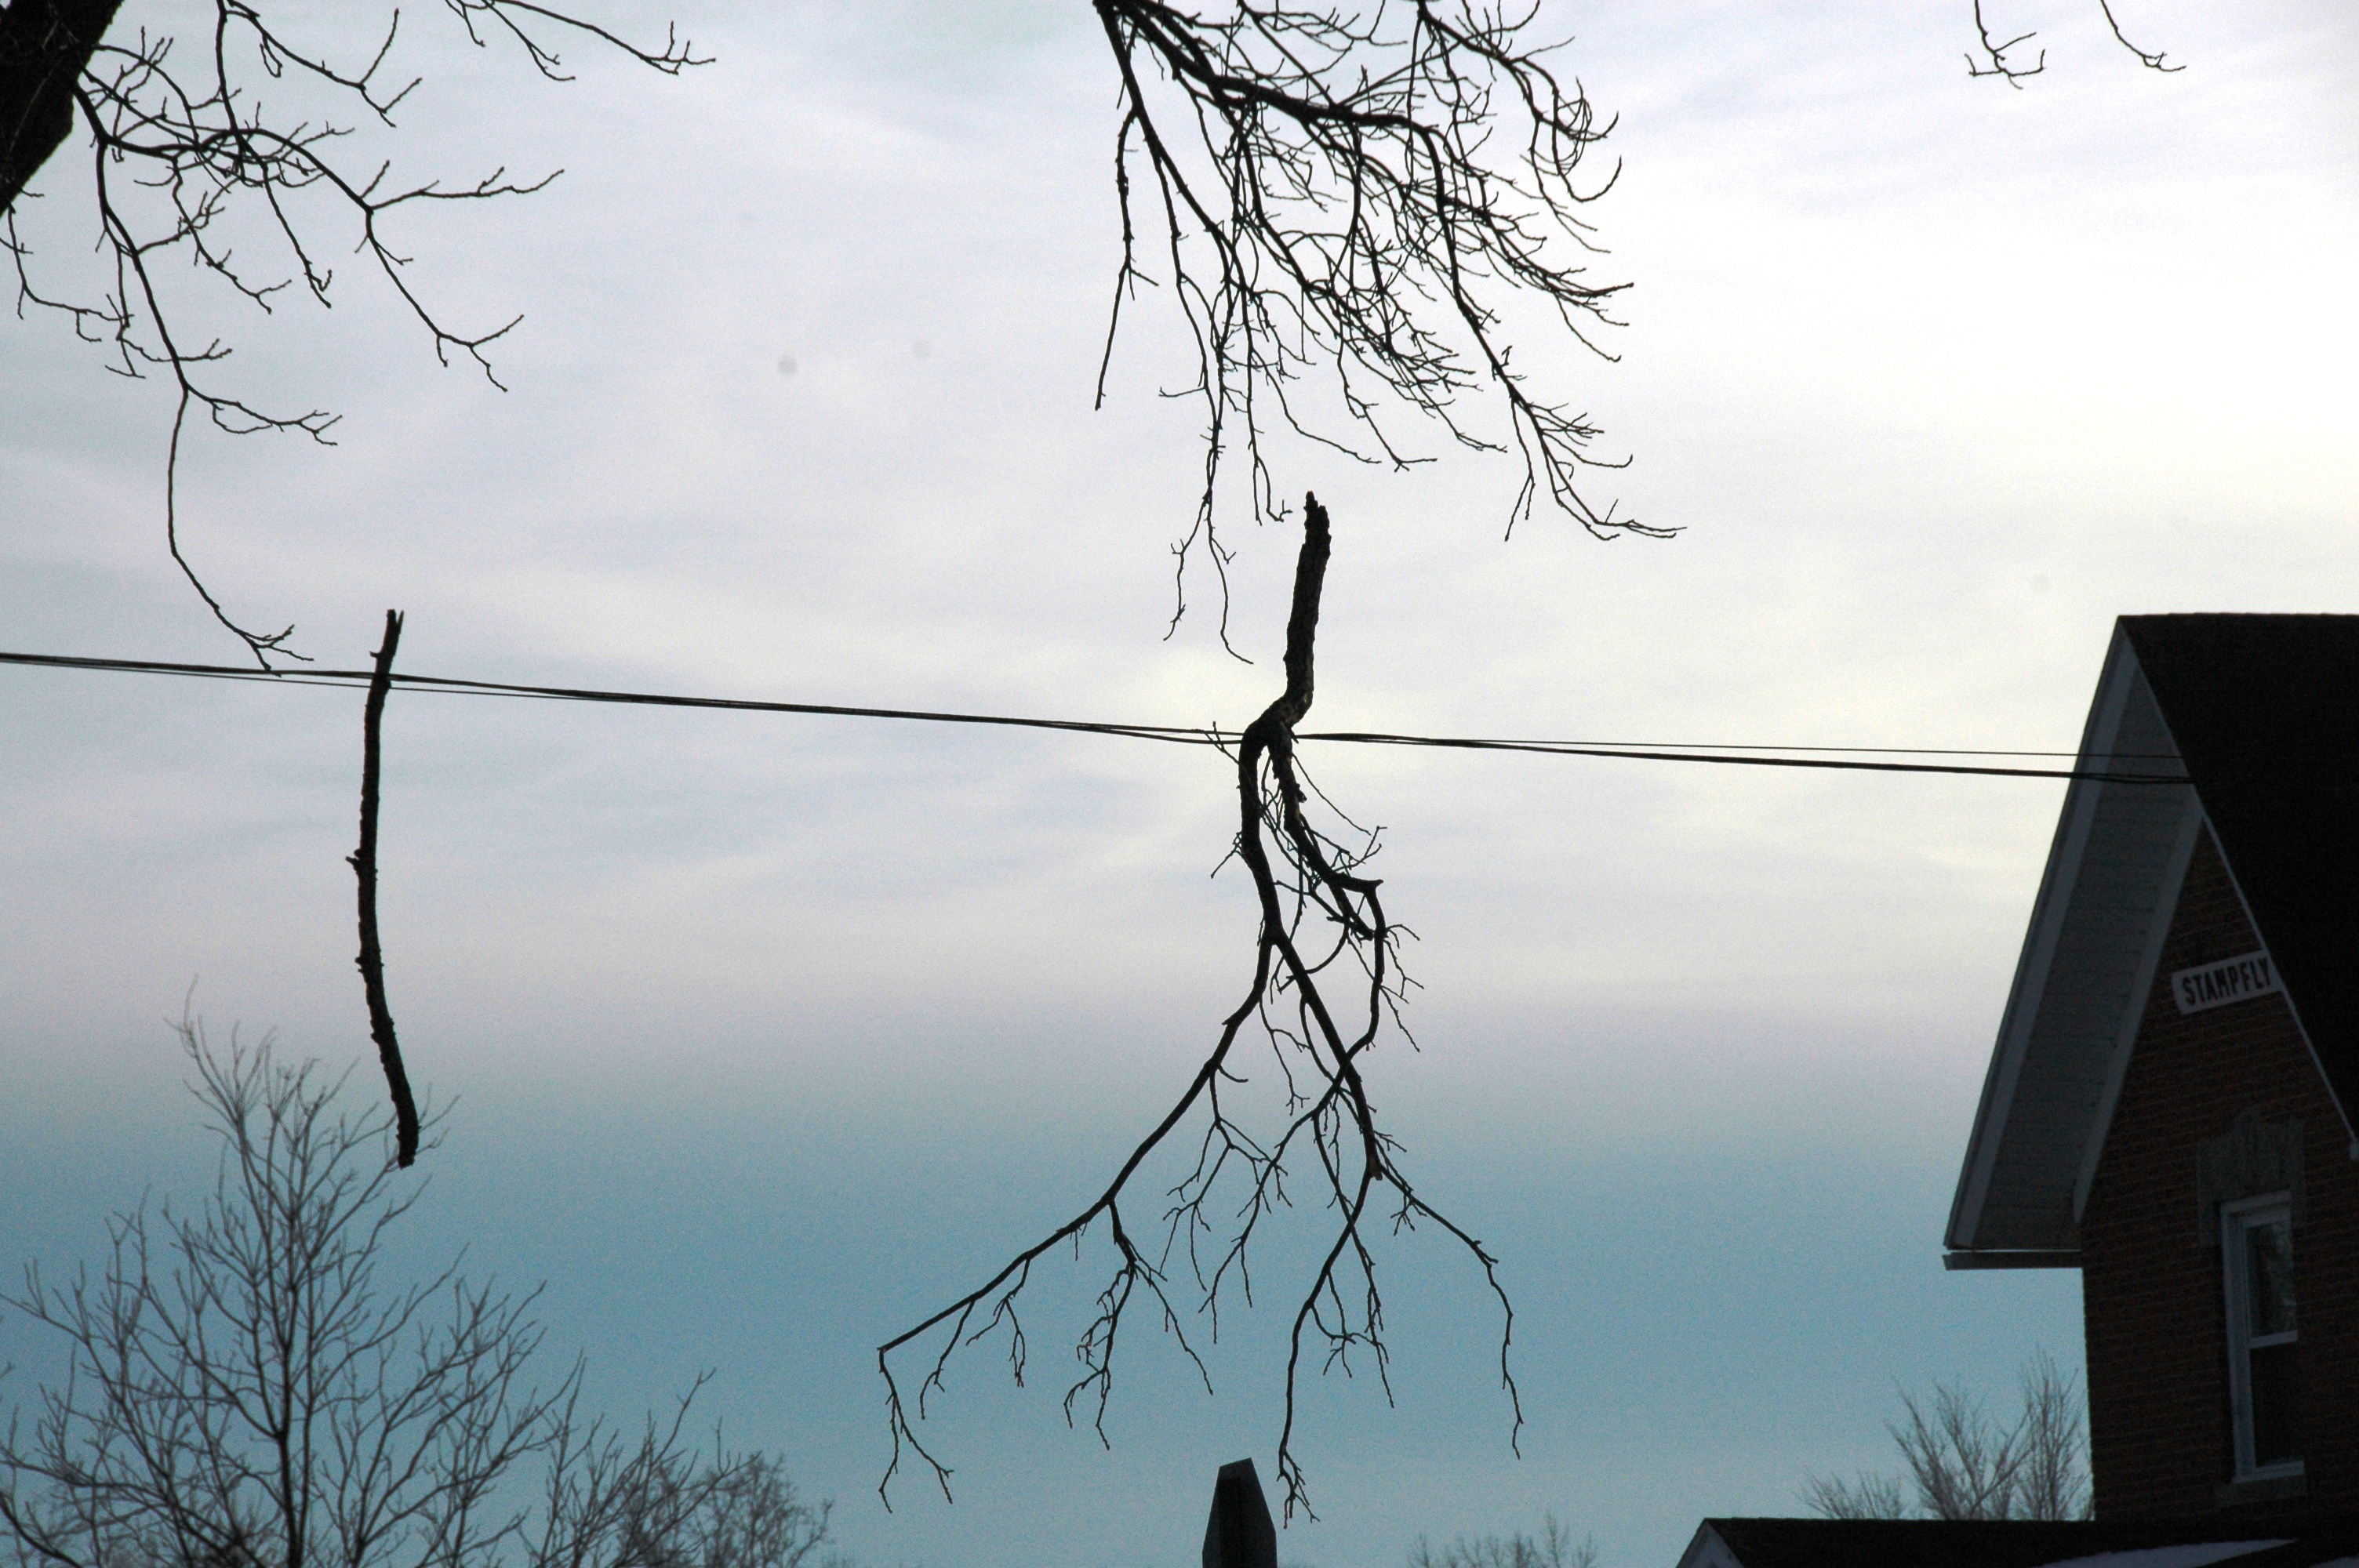 Tree limbs hanging from utility wires.